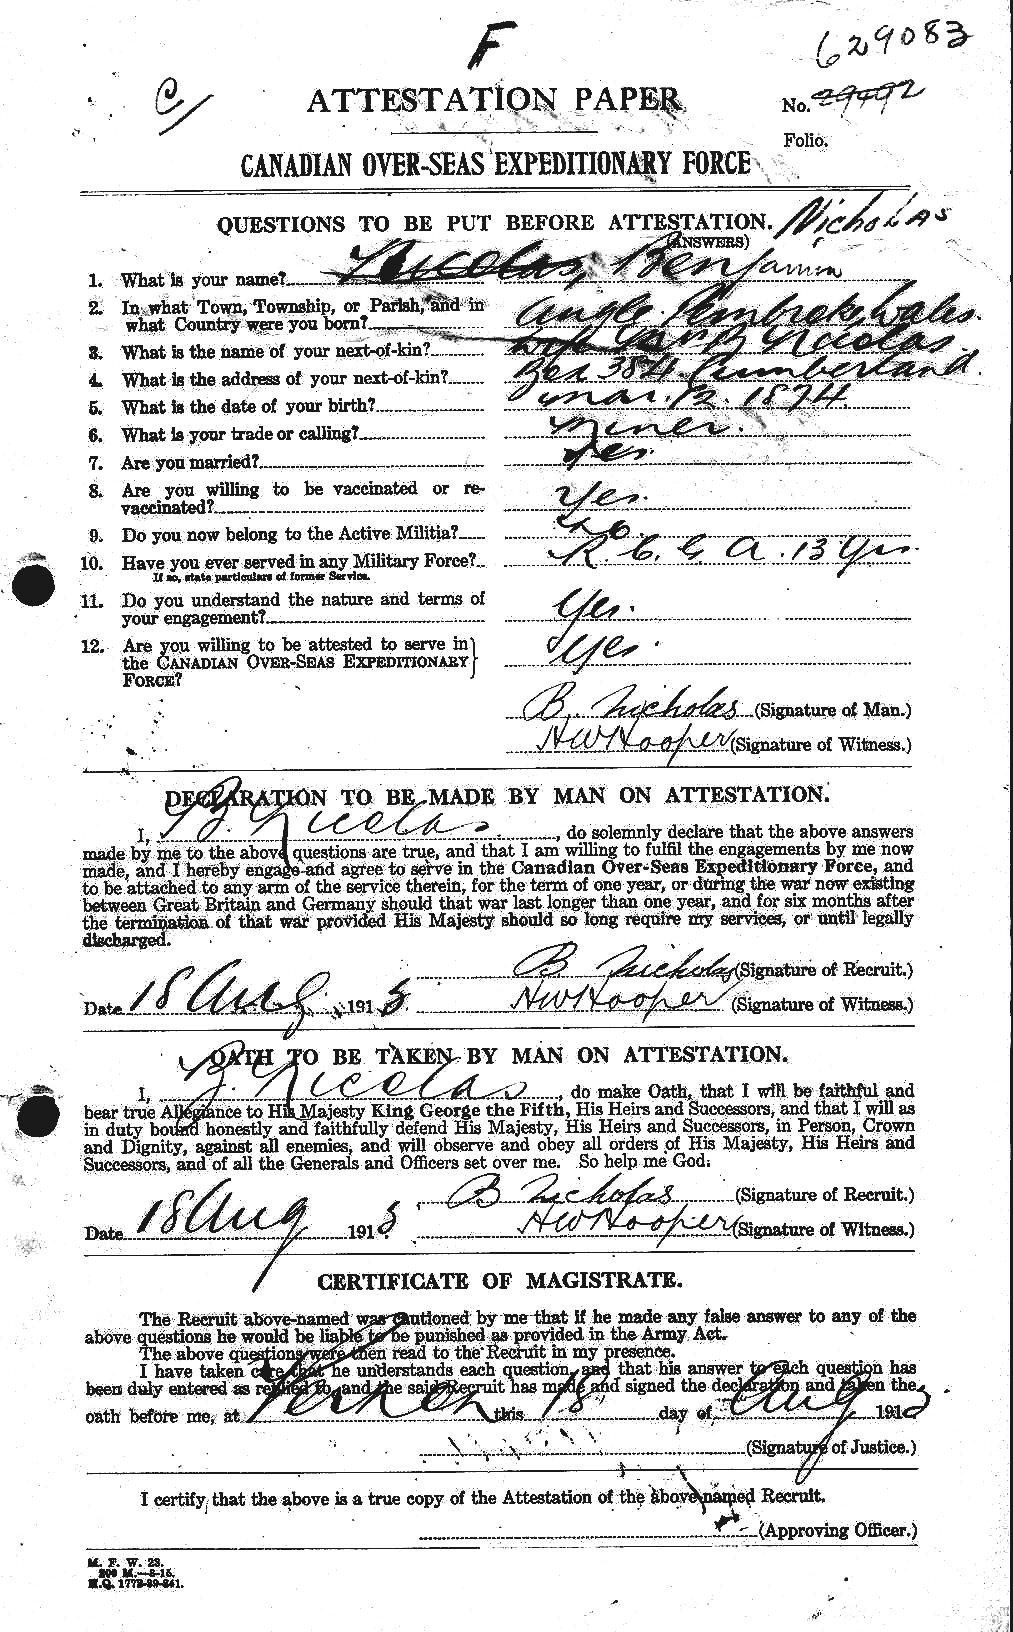 Personnel Records of the First World War - CEF 546313a